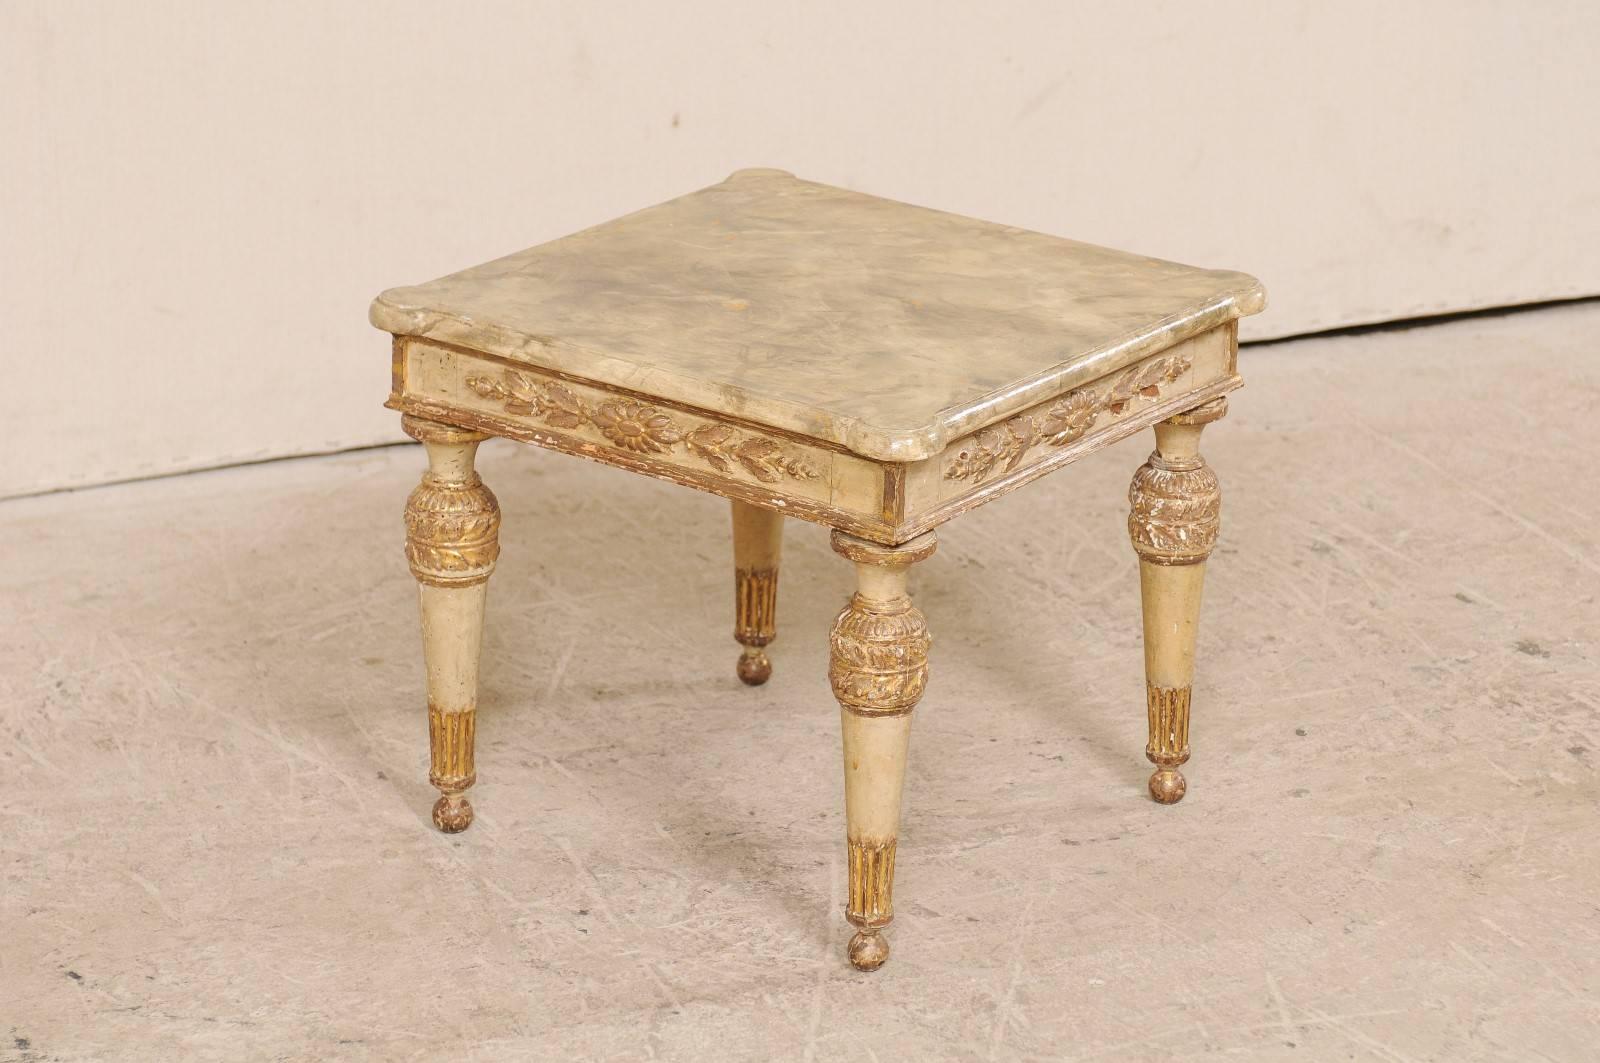 An Italian 18th century gilded and painted coffee table. This Italian antique coffee table has a wonderfully carved apron, adorn in a floral motif on all sides. The hand-painted, faux-marble top is a later addition, which adds much interest to the